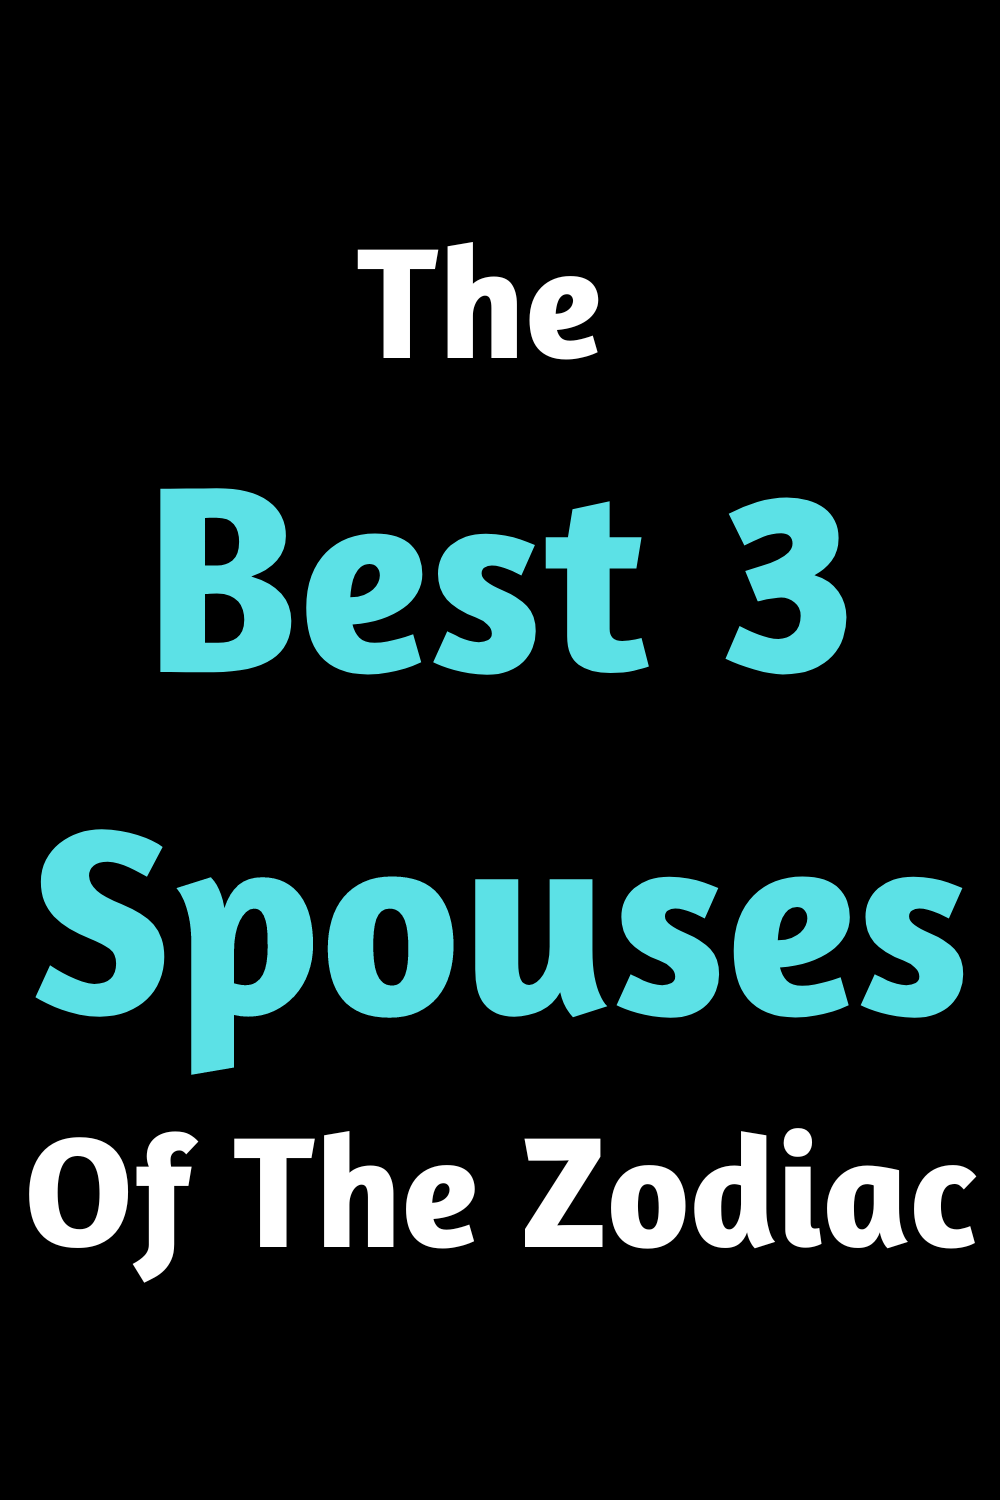 The Best 3 Spouses Of The Zodiac